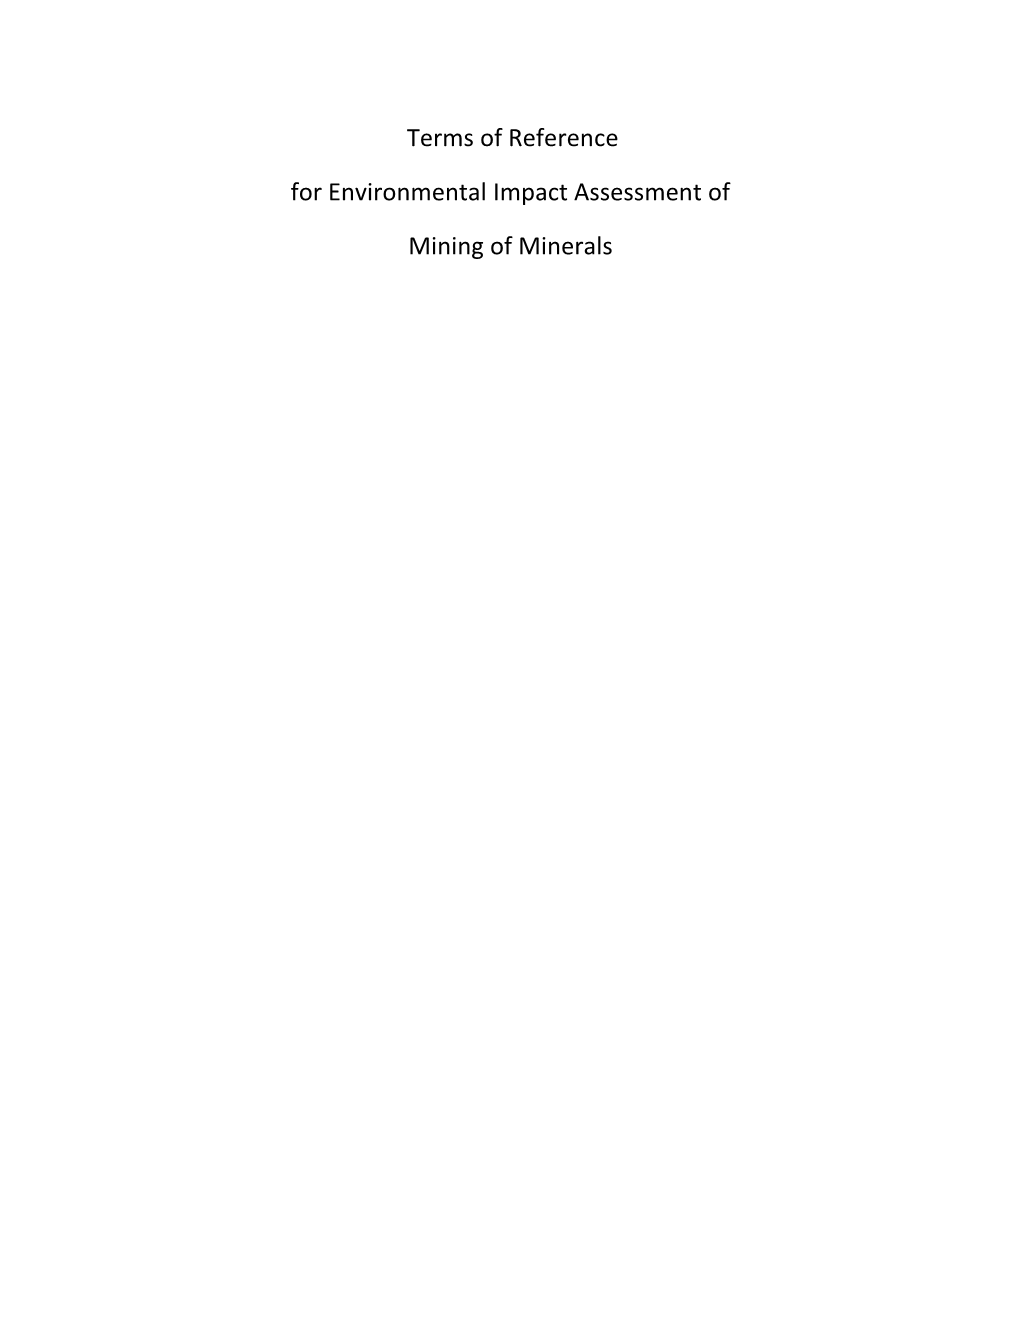 Terms of Reference for Environmental Impact Assessment of Mining Of